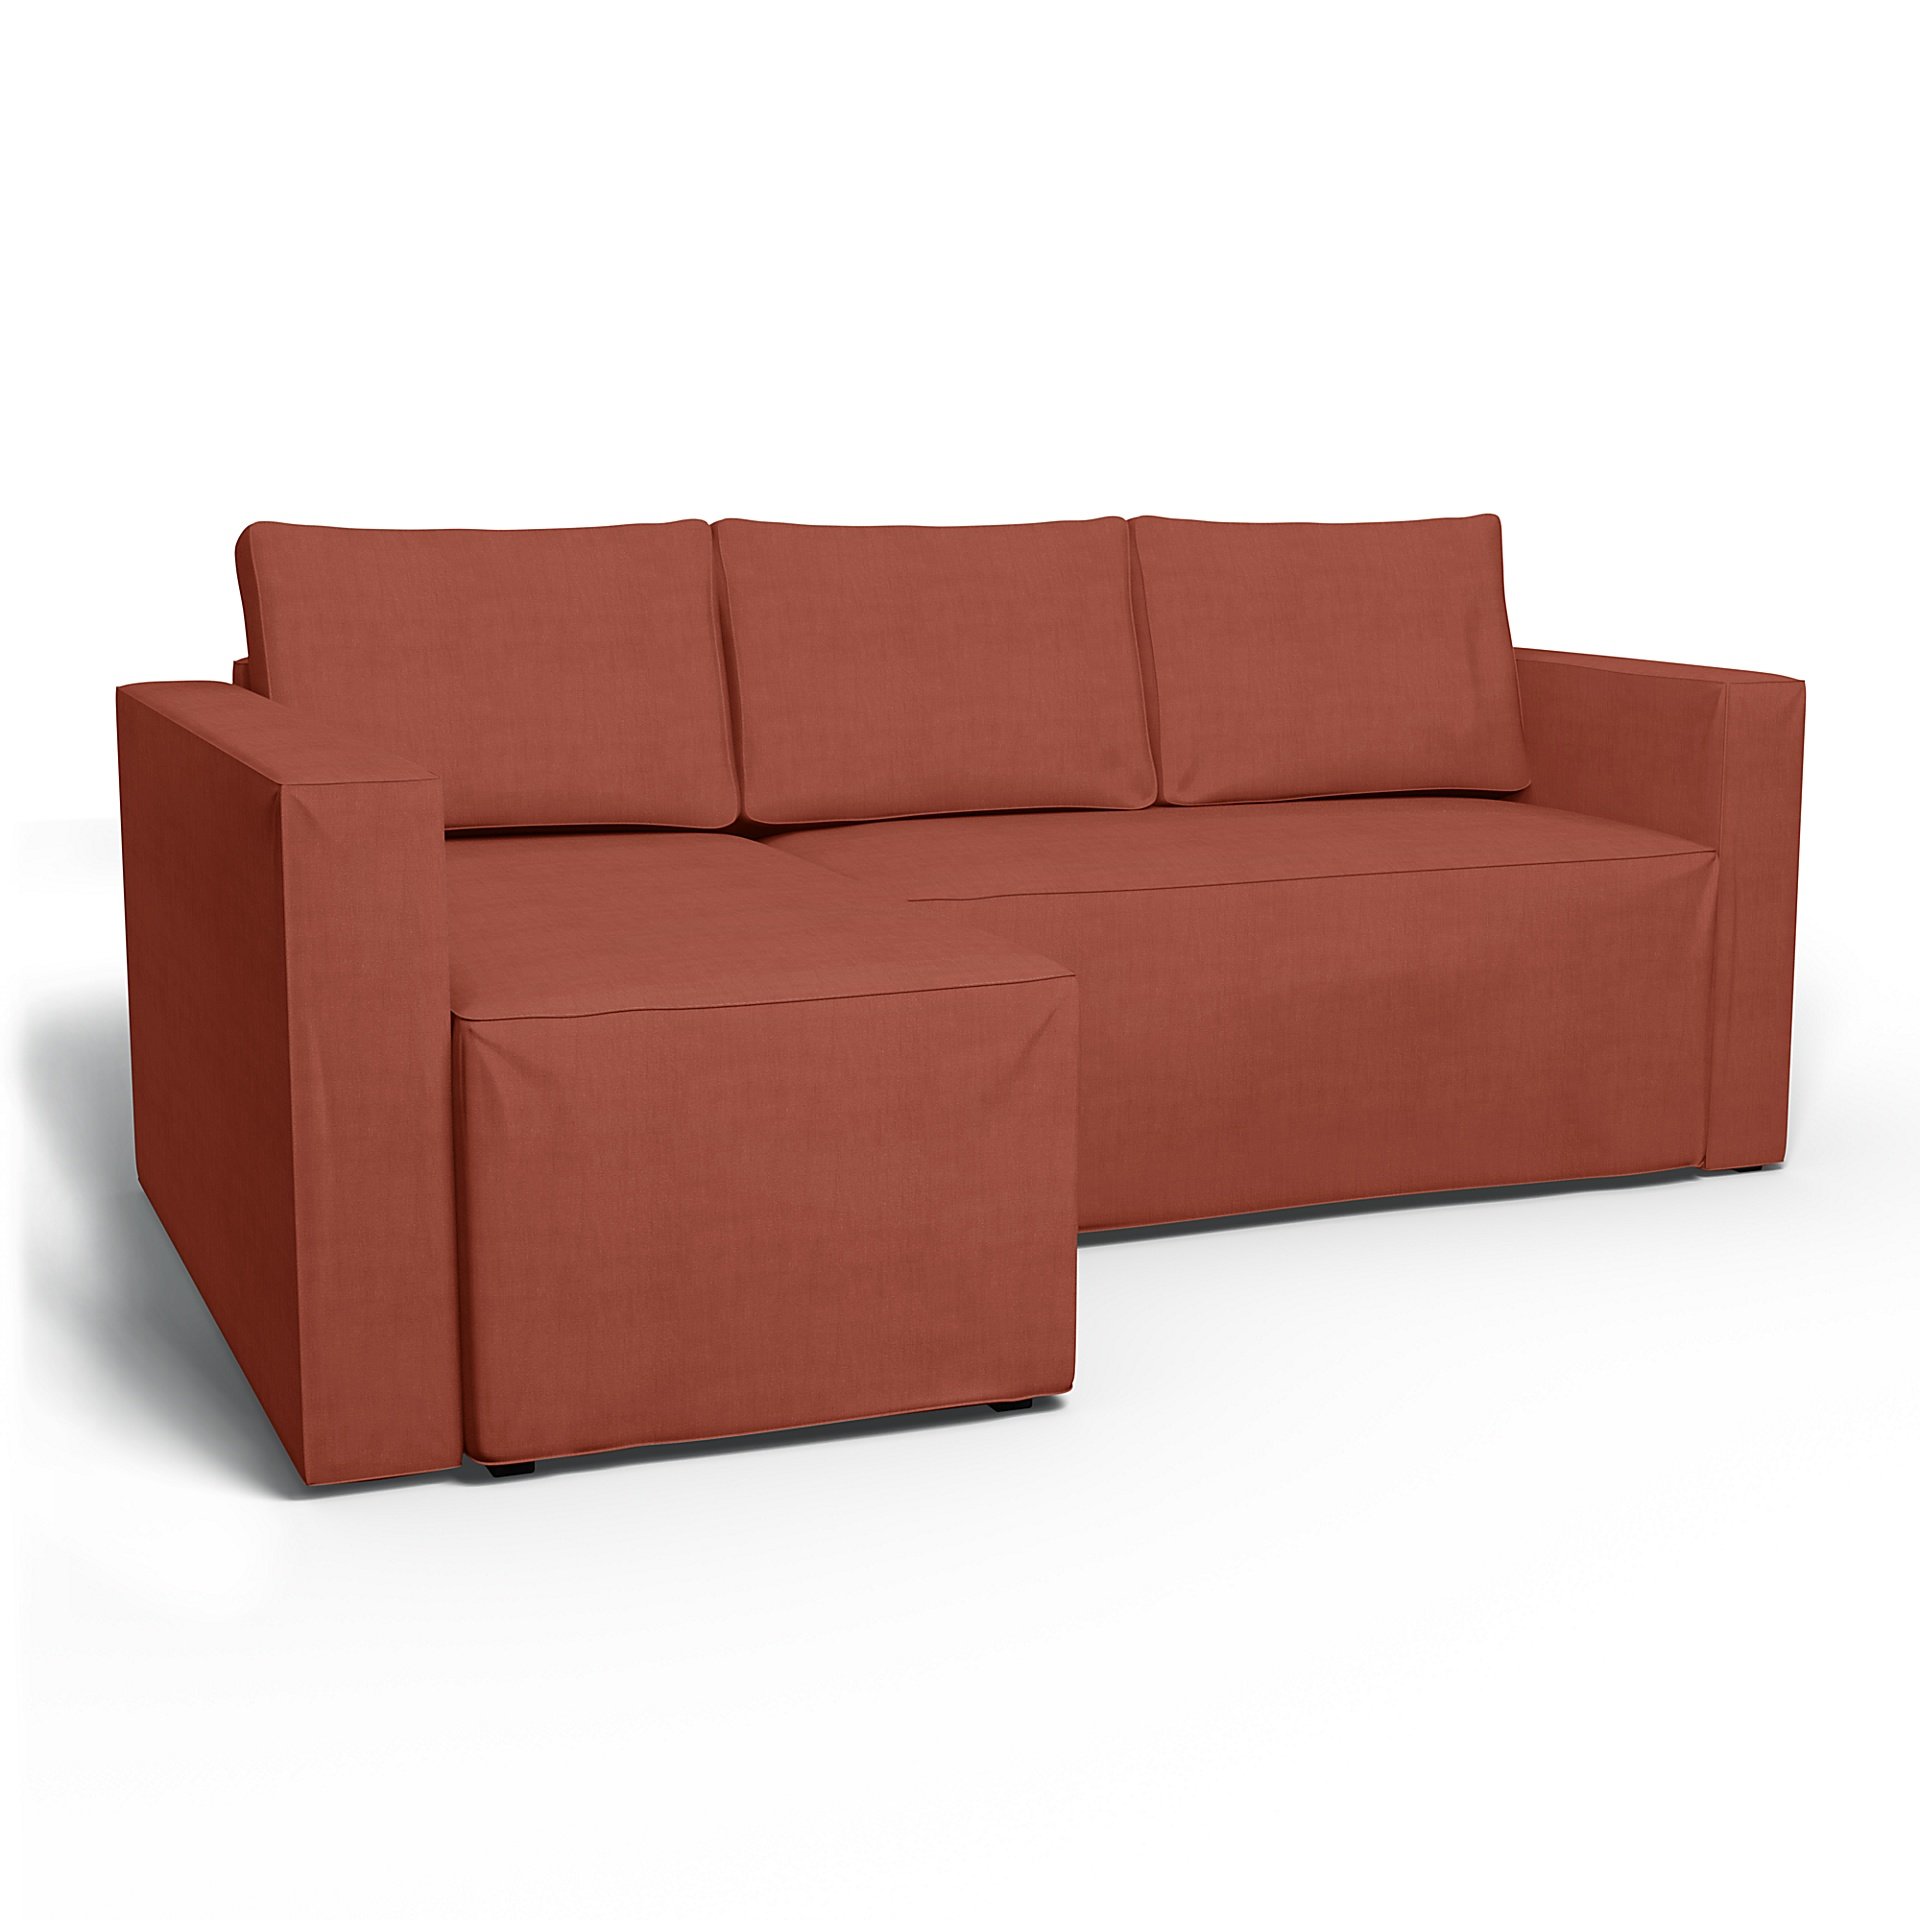 IKEA - Manstad Sofa Bed with Left Chaise Cover, Terracotta, Linen - Bemz